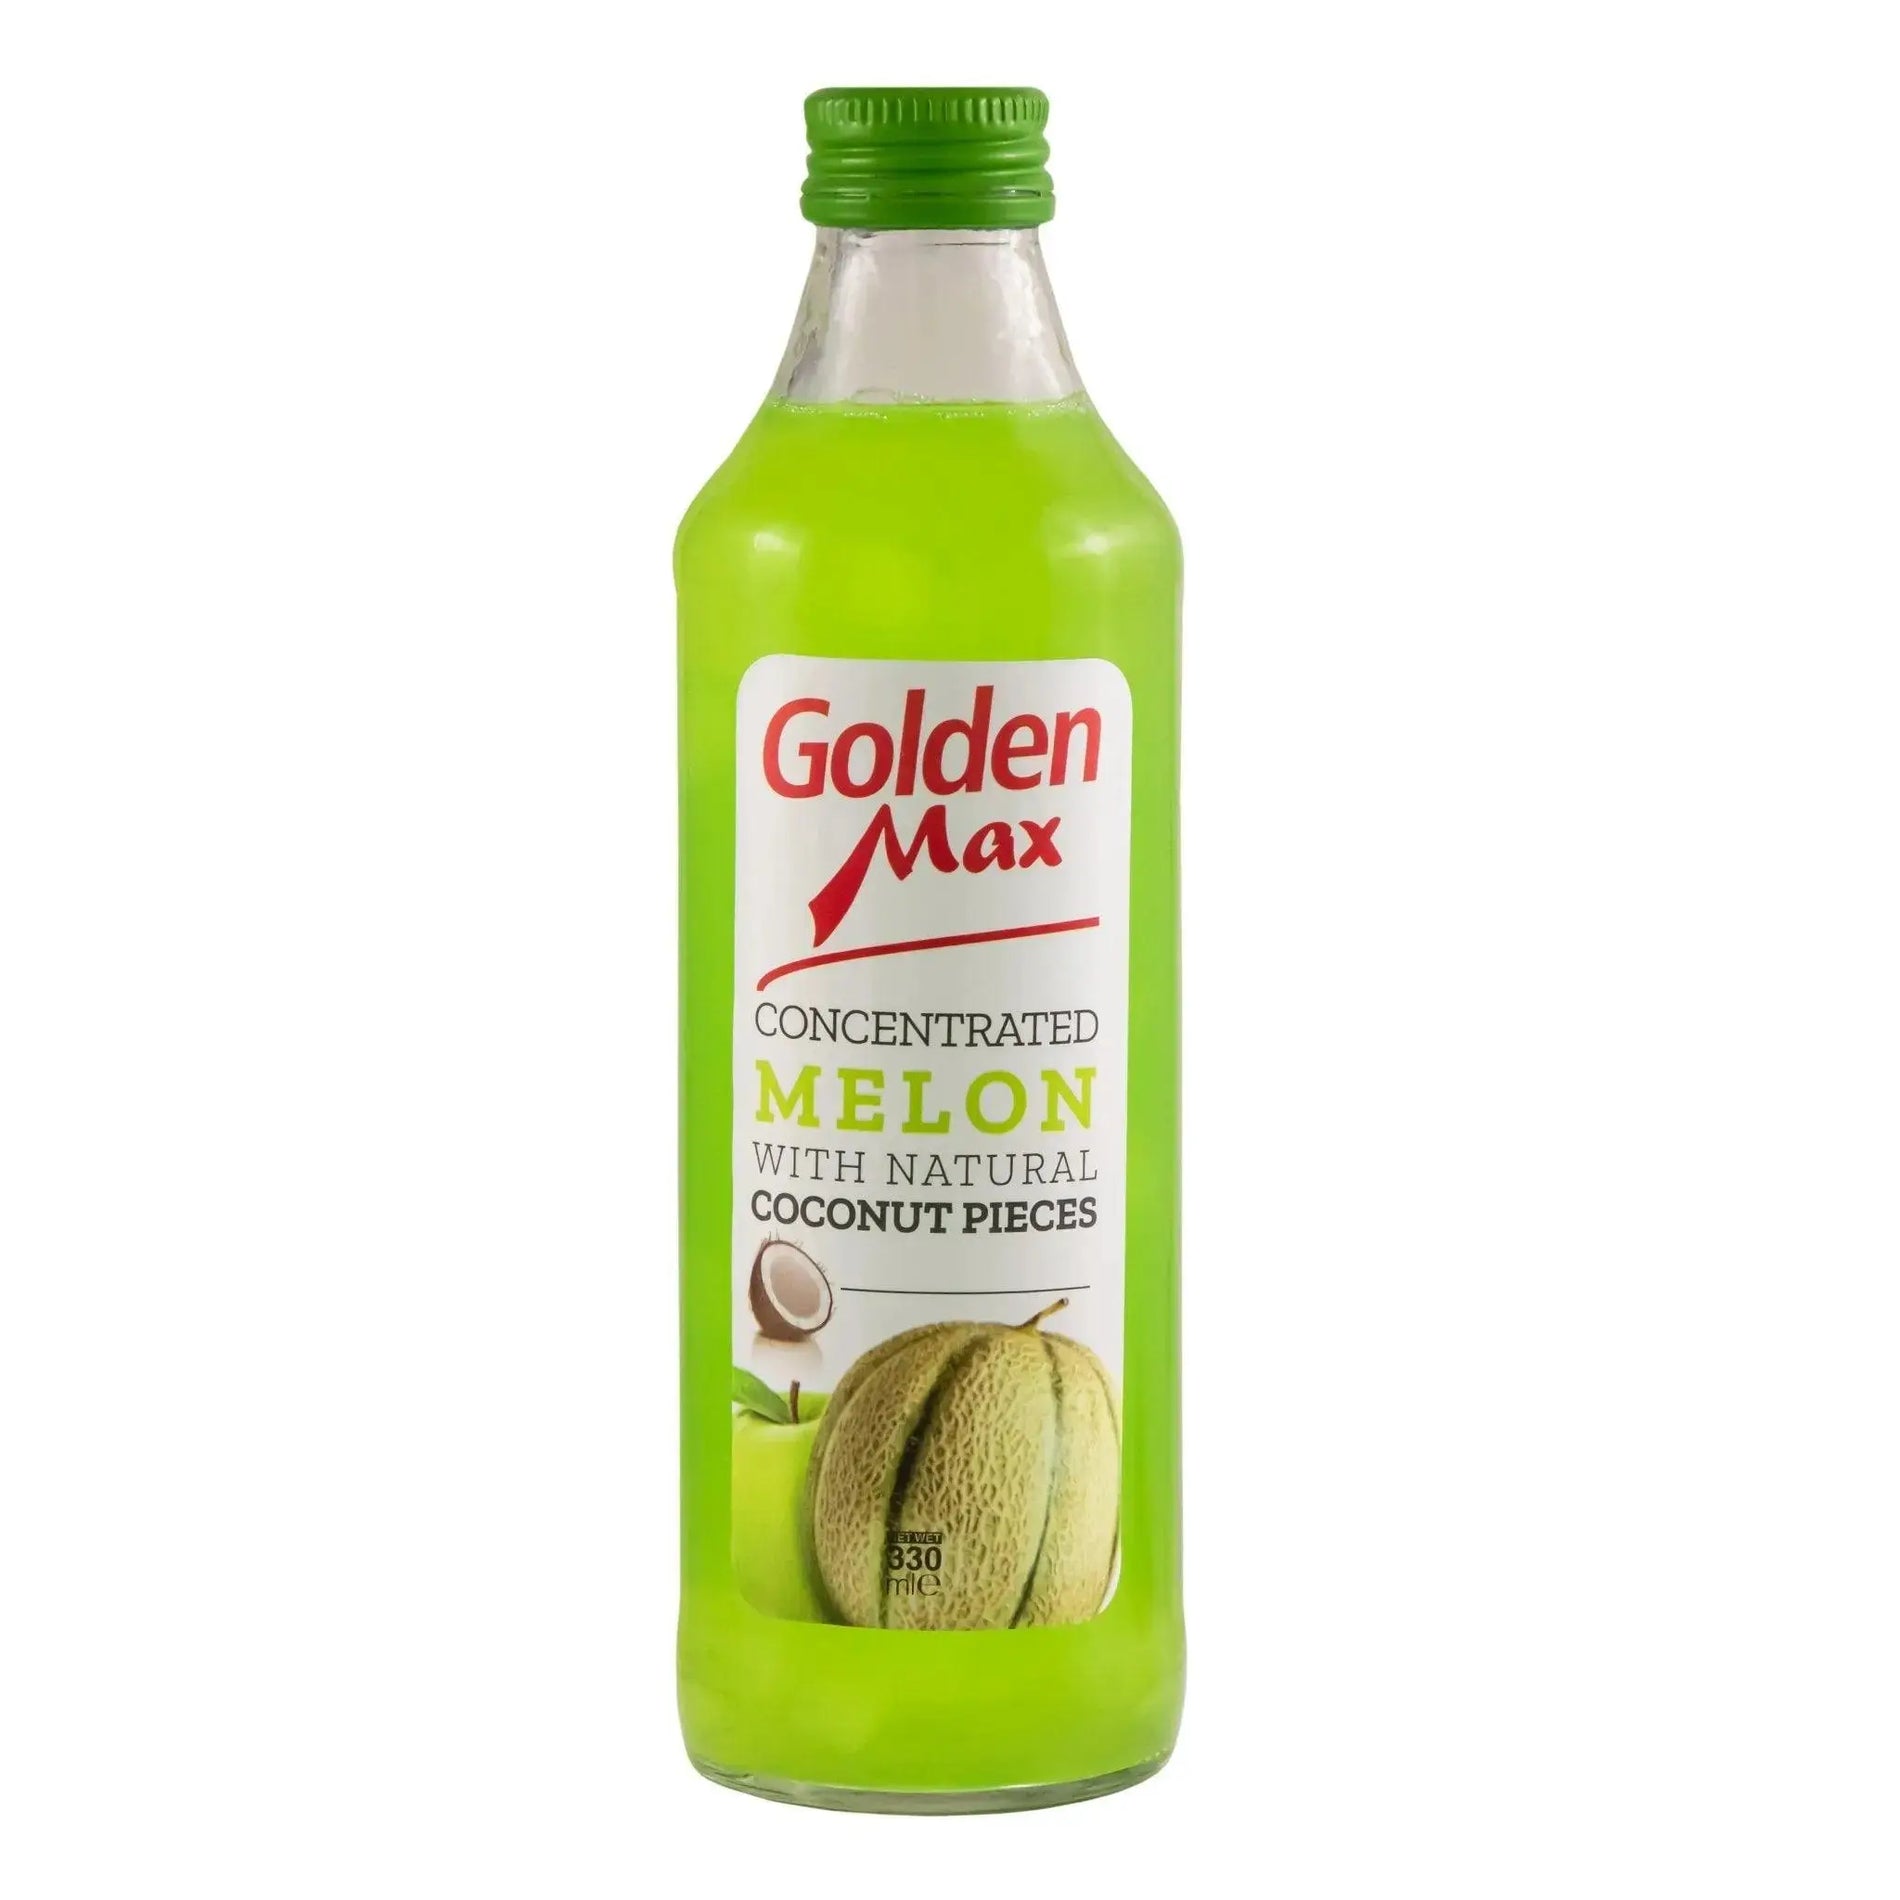 The-Perfect-Blend-Melon-and-Coconut-in-Every-Sip-of-Golden-Max-Nata-de-Coco Marino.AE